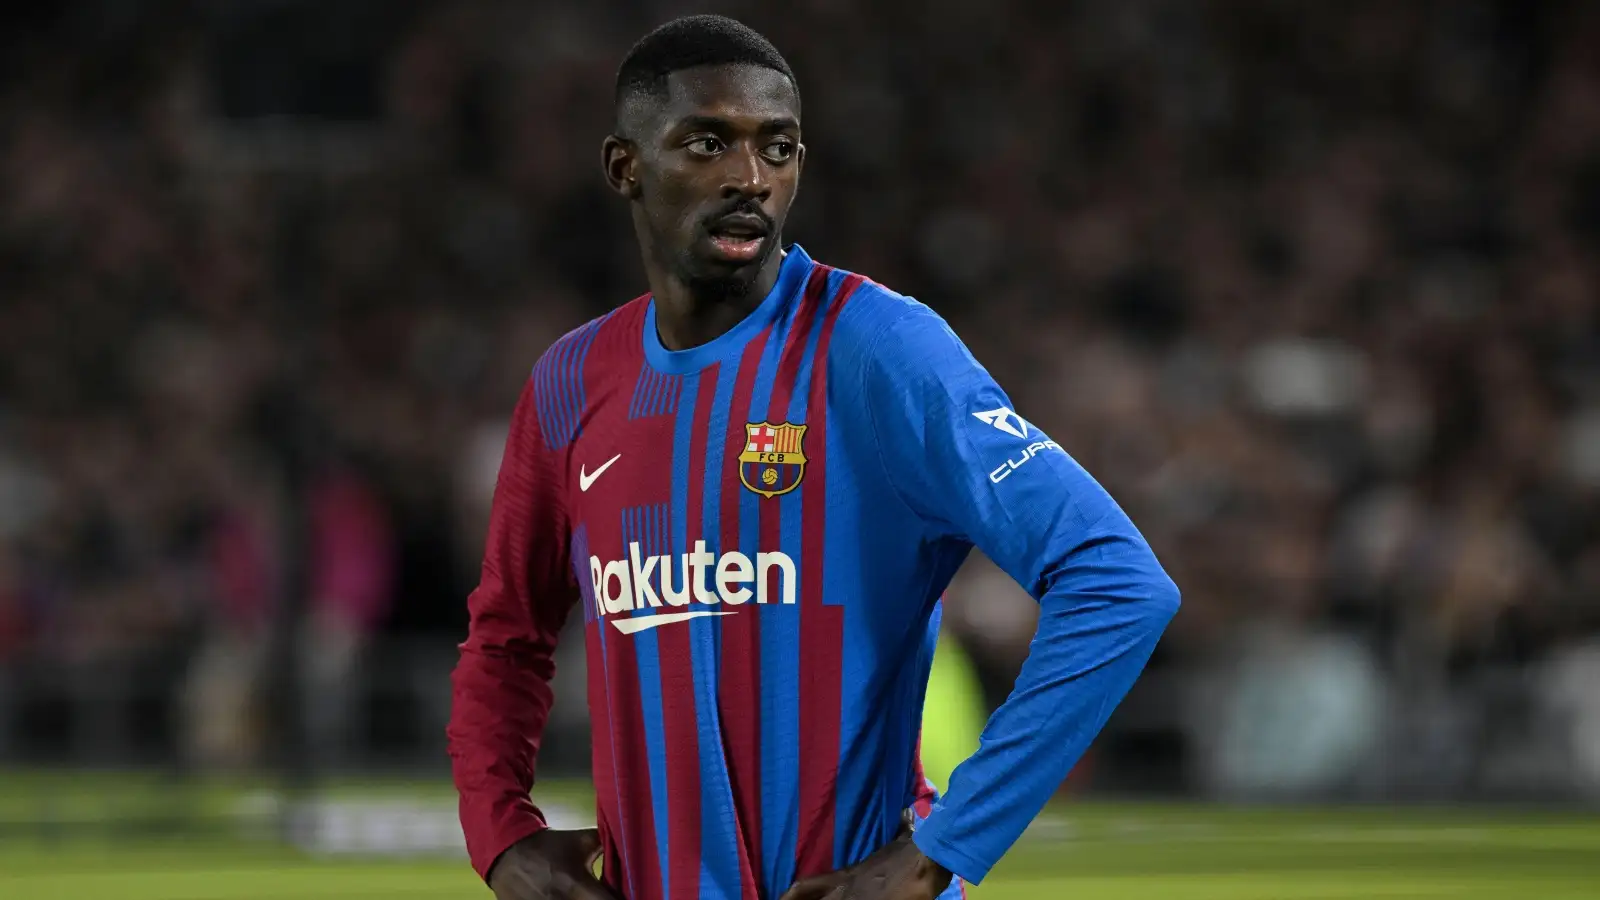 Ousmane Dembele during a match